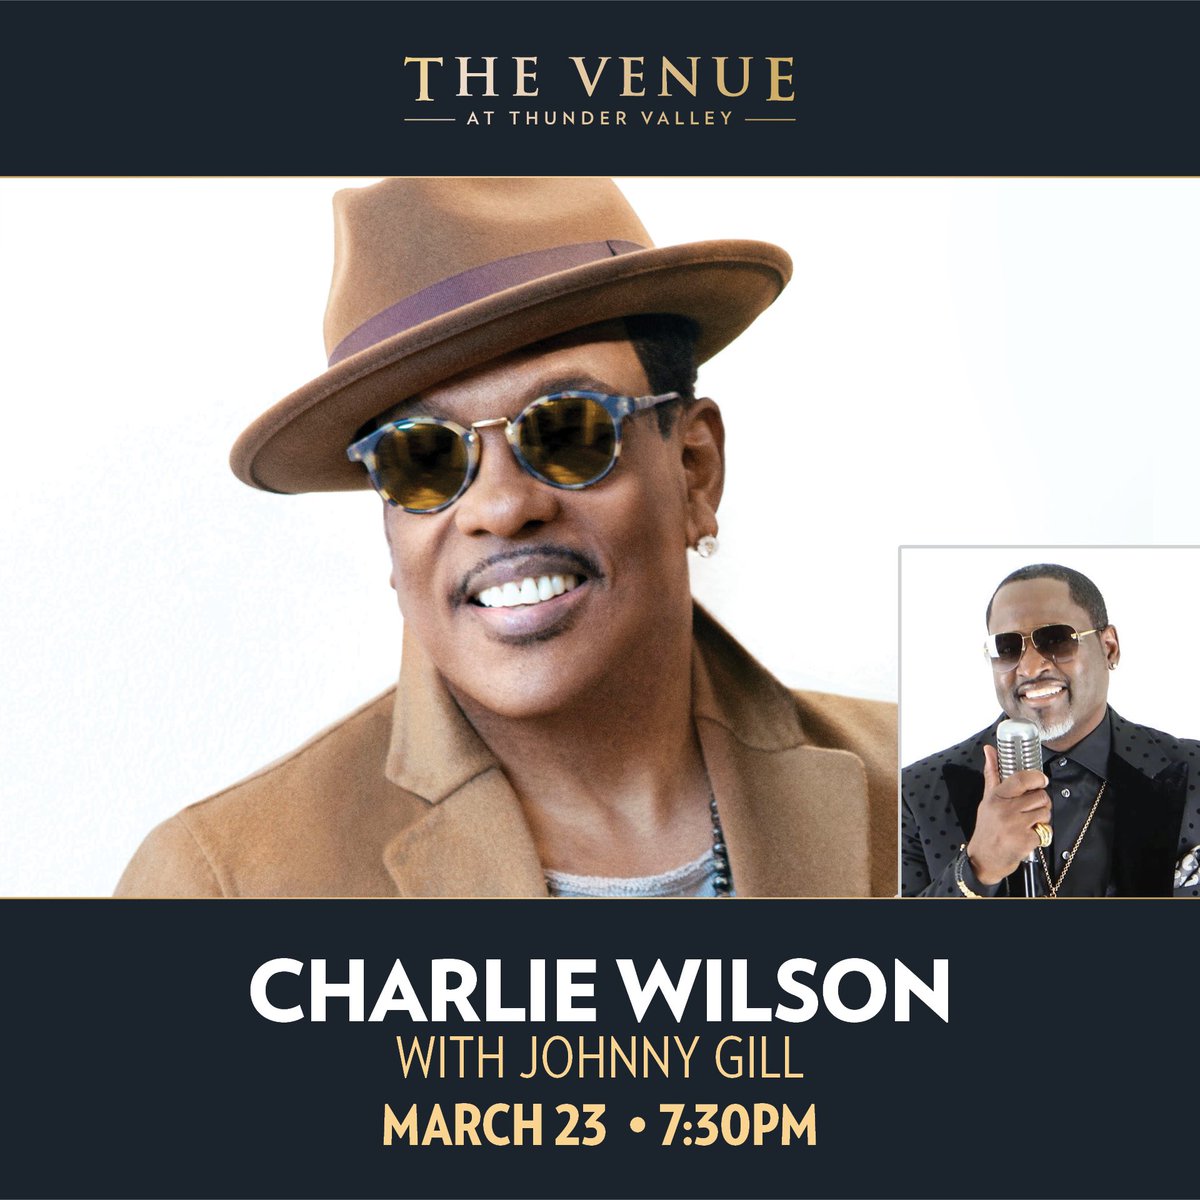 Lincoln, y’all ready! 🕺🏾I’m headed to The Venue at @Thunder_Valley this Saturday, 3/23 with @JohnnyGill! Get your tickets 🎶 @PMusicGroup lnk.to/CharlieWilson